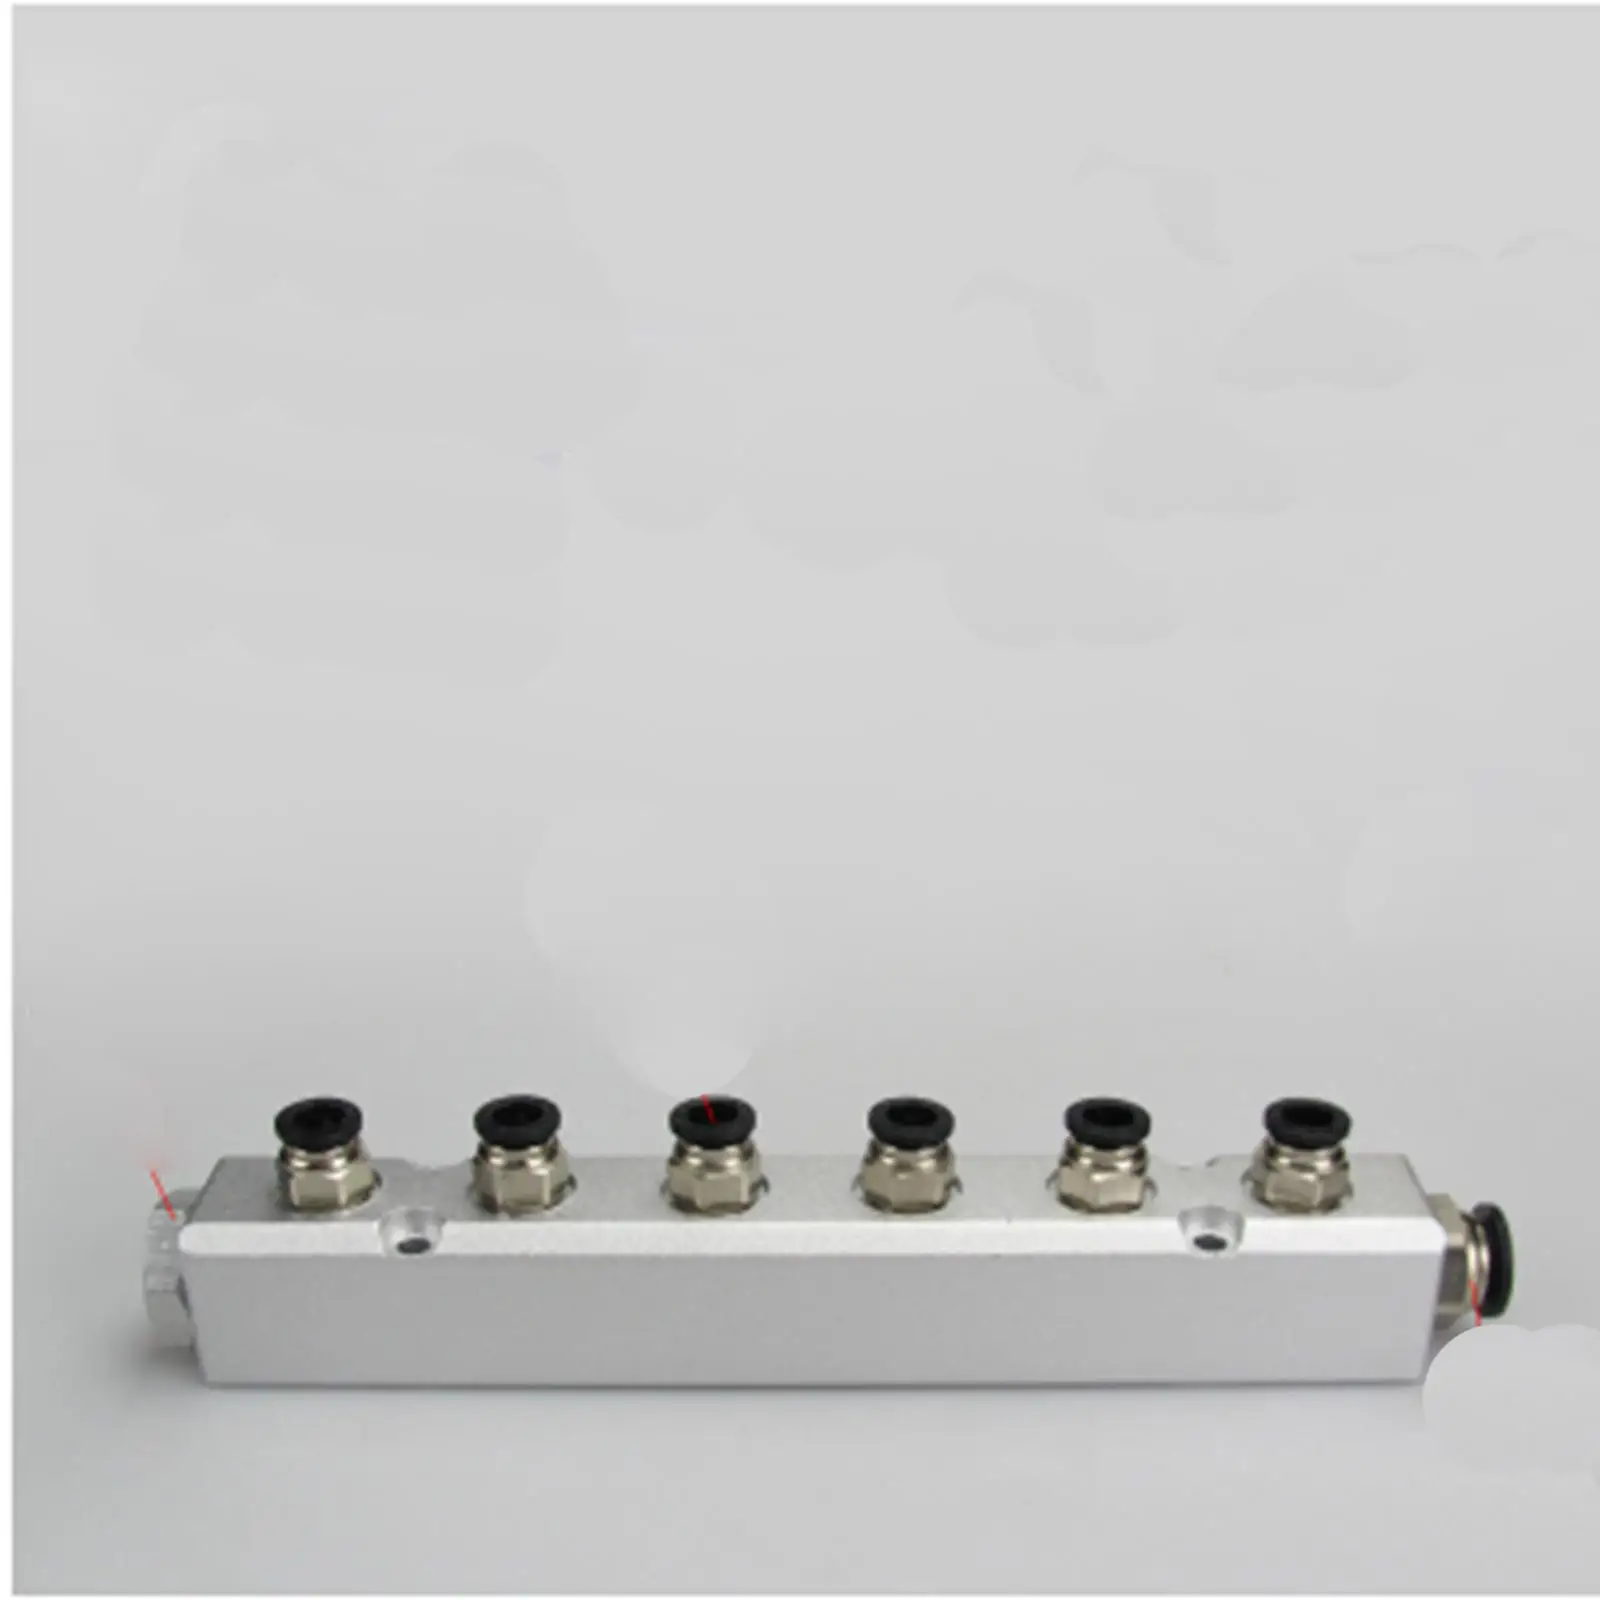 

30x30mm G1/4" Out G1/2" In 6 Way Pneumatic Fitting Air Manifold Block Splitter